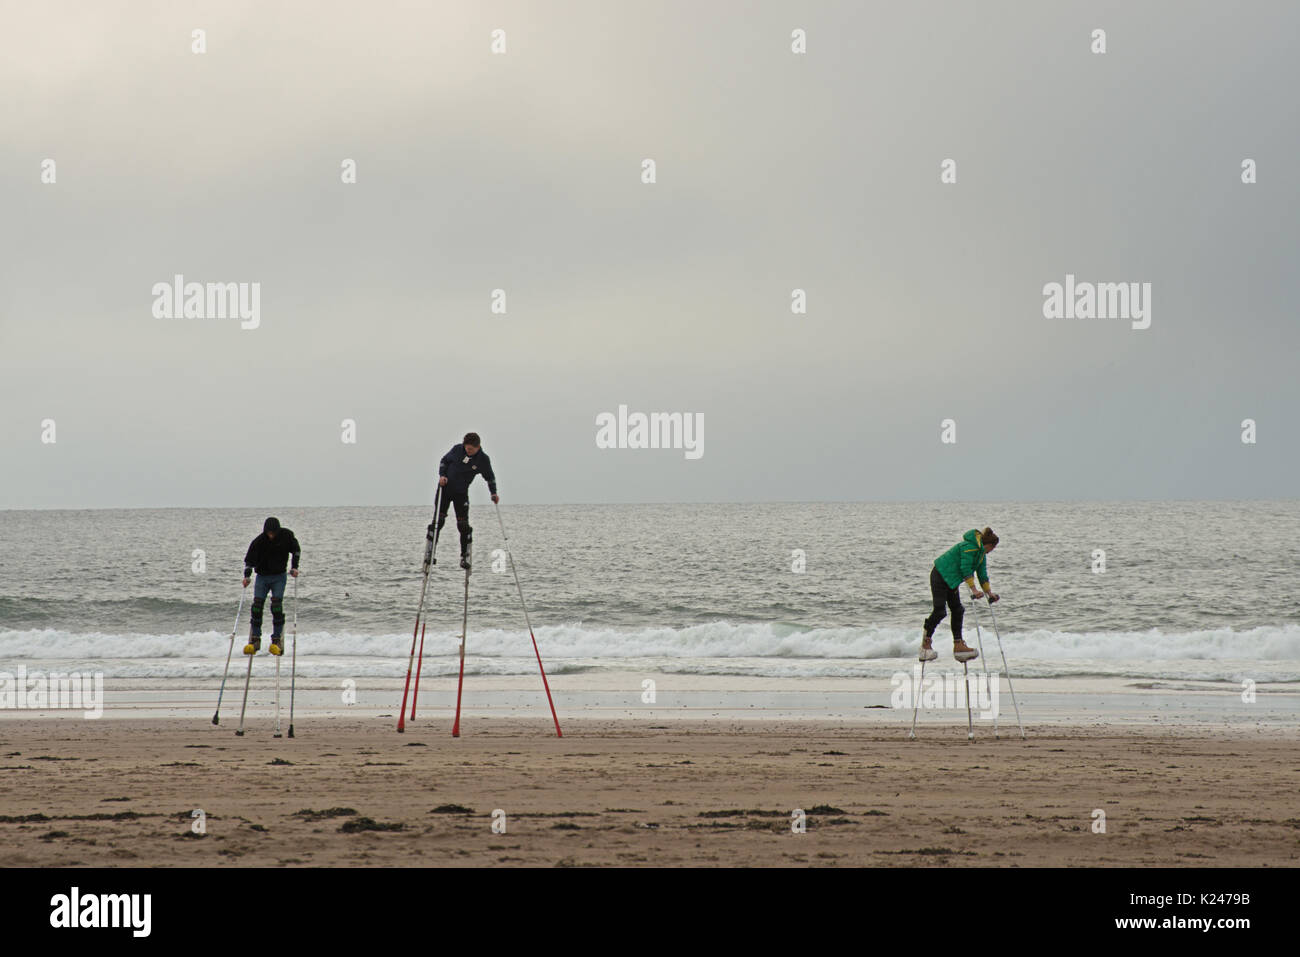 Three stilt walkers in practice along the Northumberland coast with the sea in the background as rain approaches Stock Photo